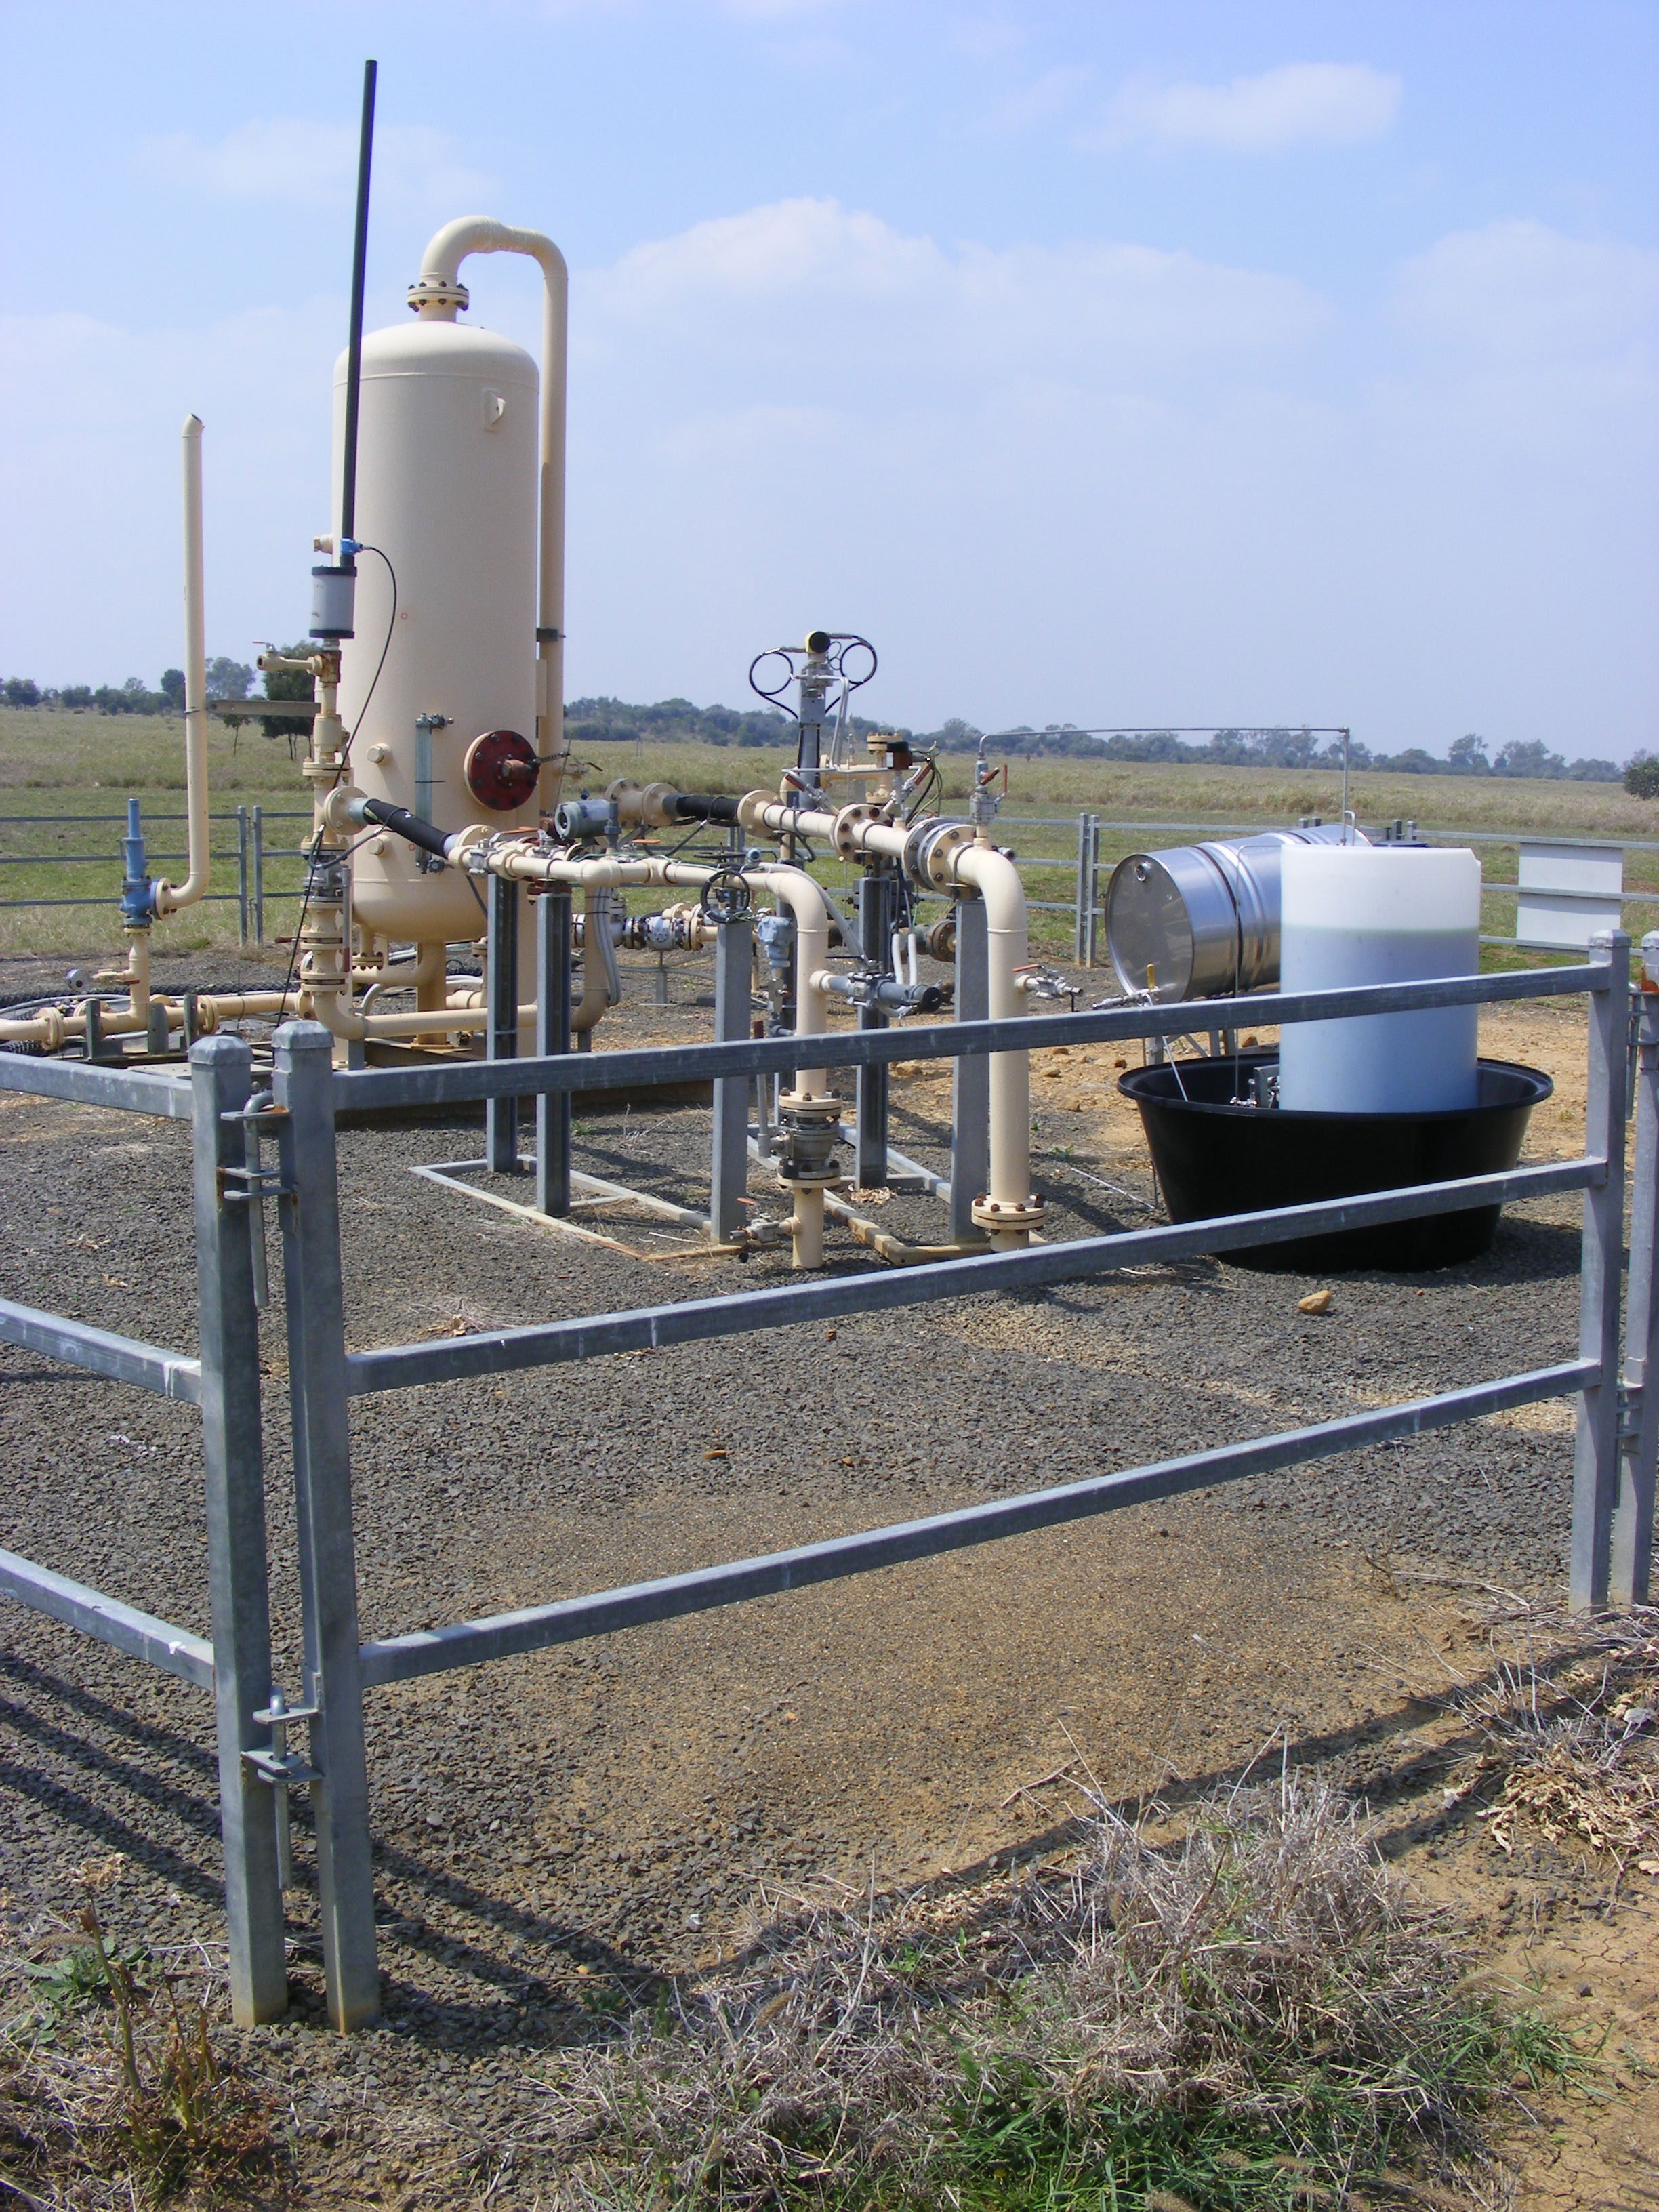 A CSG well with pipes and tanks